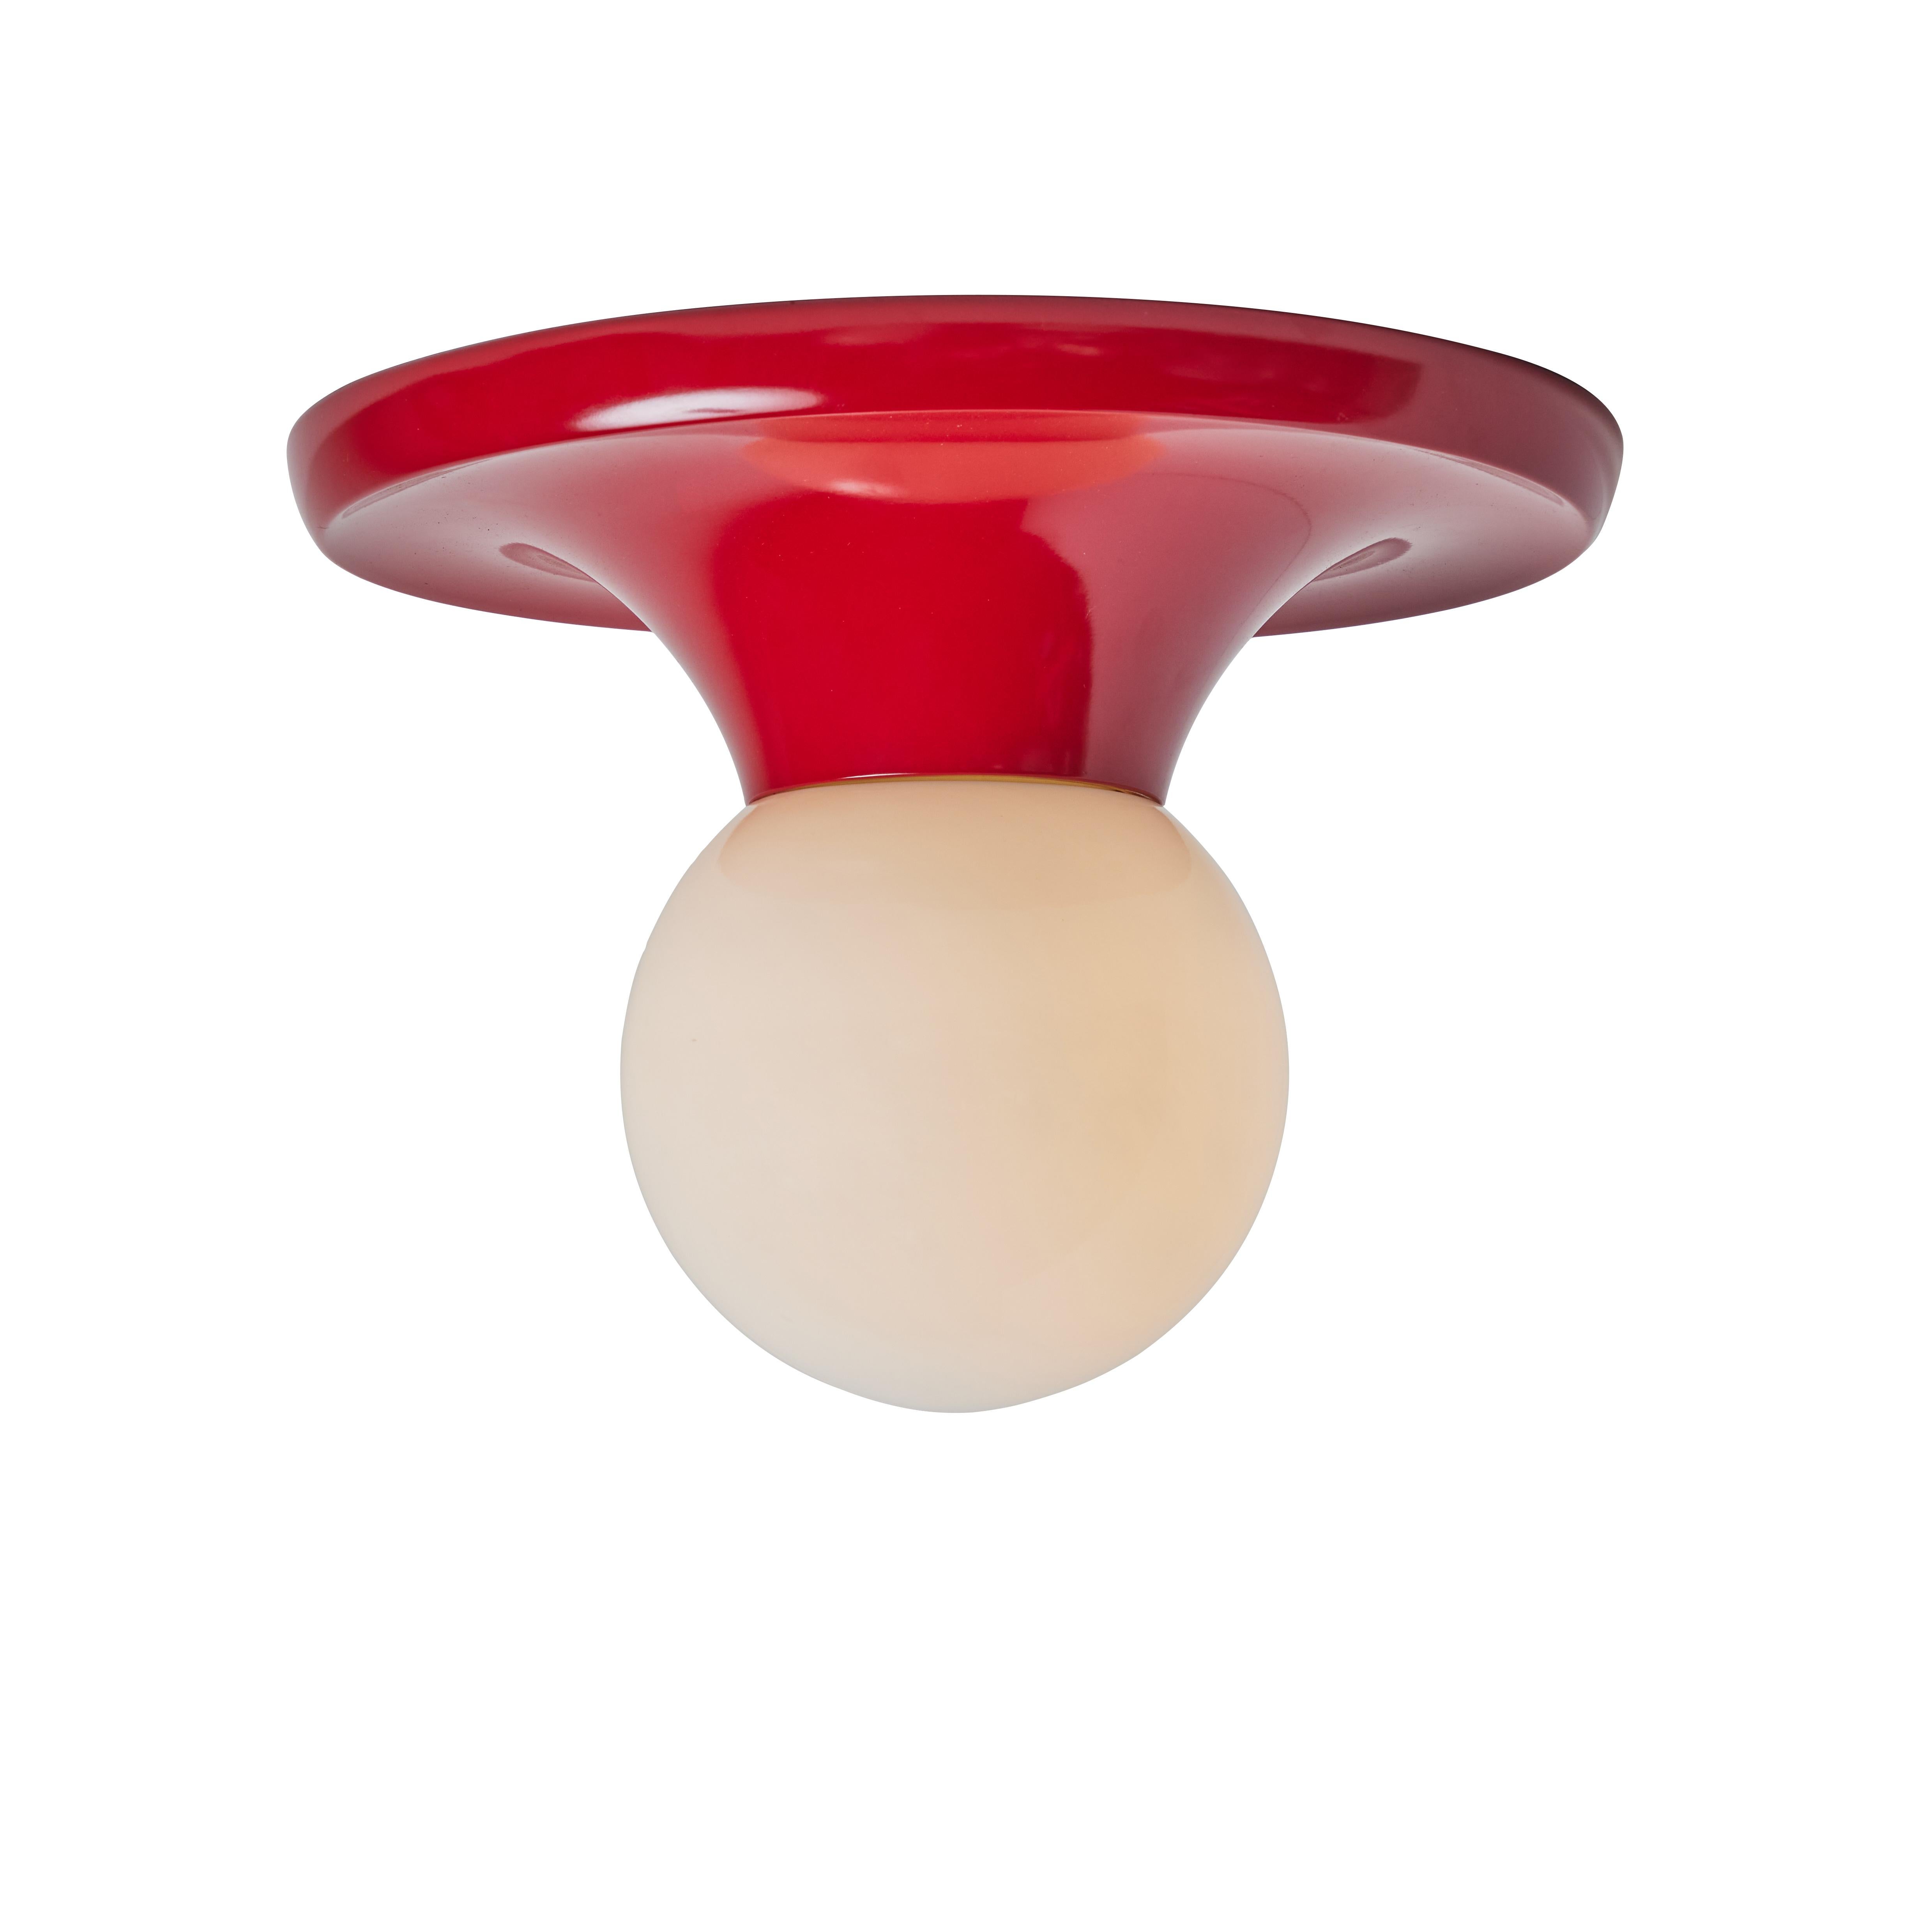 1960s Achille Castiglioni 'Light Ball' wall or ceiling lamp in red for Flos. Designed in 1965, this rare and vintage red painted variant comes with satin opaque glass. An incredibly refined and iconic midcentury design that is quintessentially